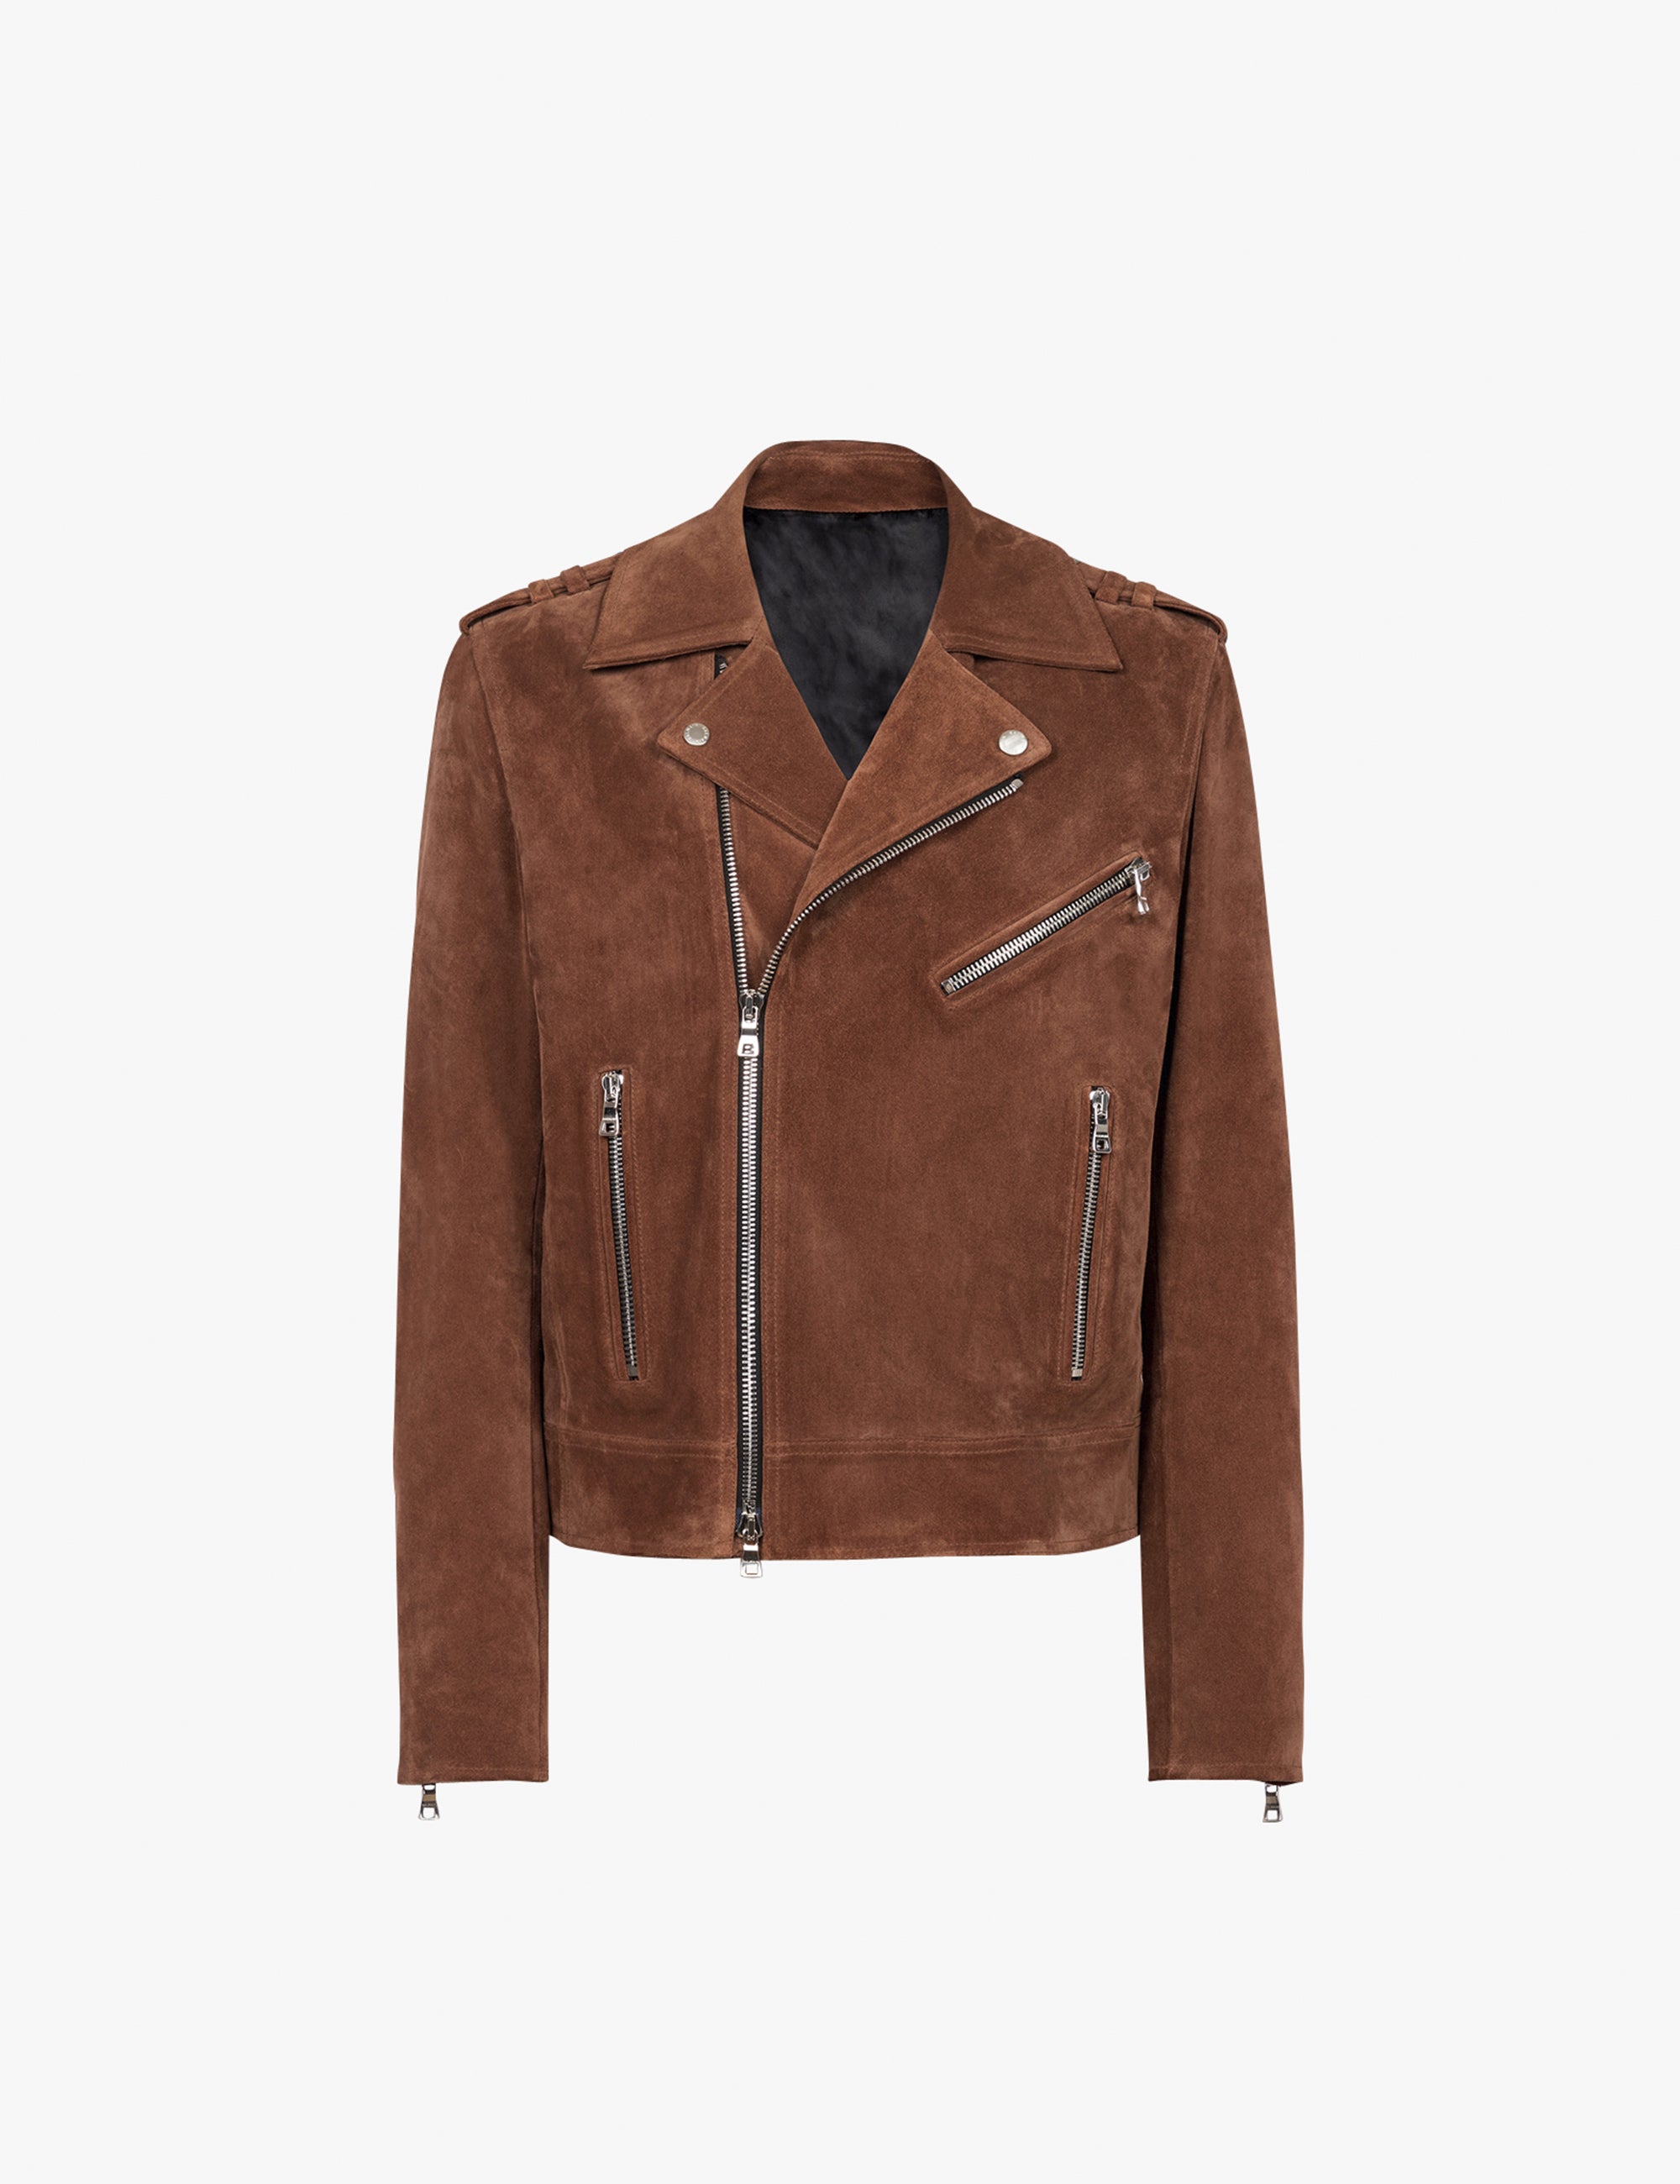 Balmain x The Harder They Fall Suede Jacket